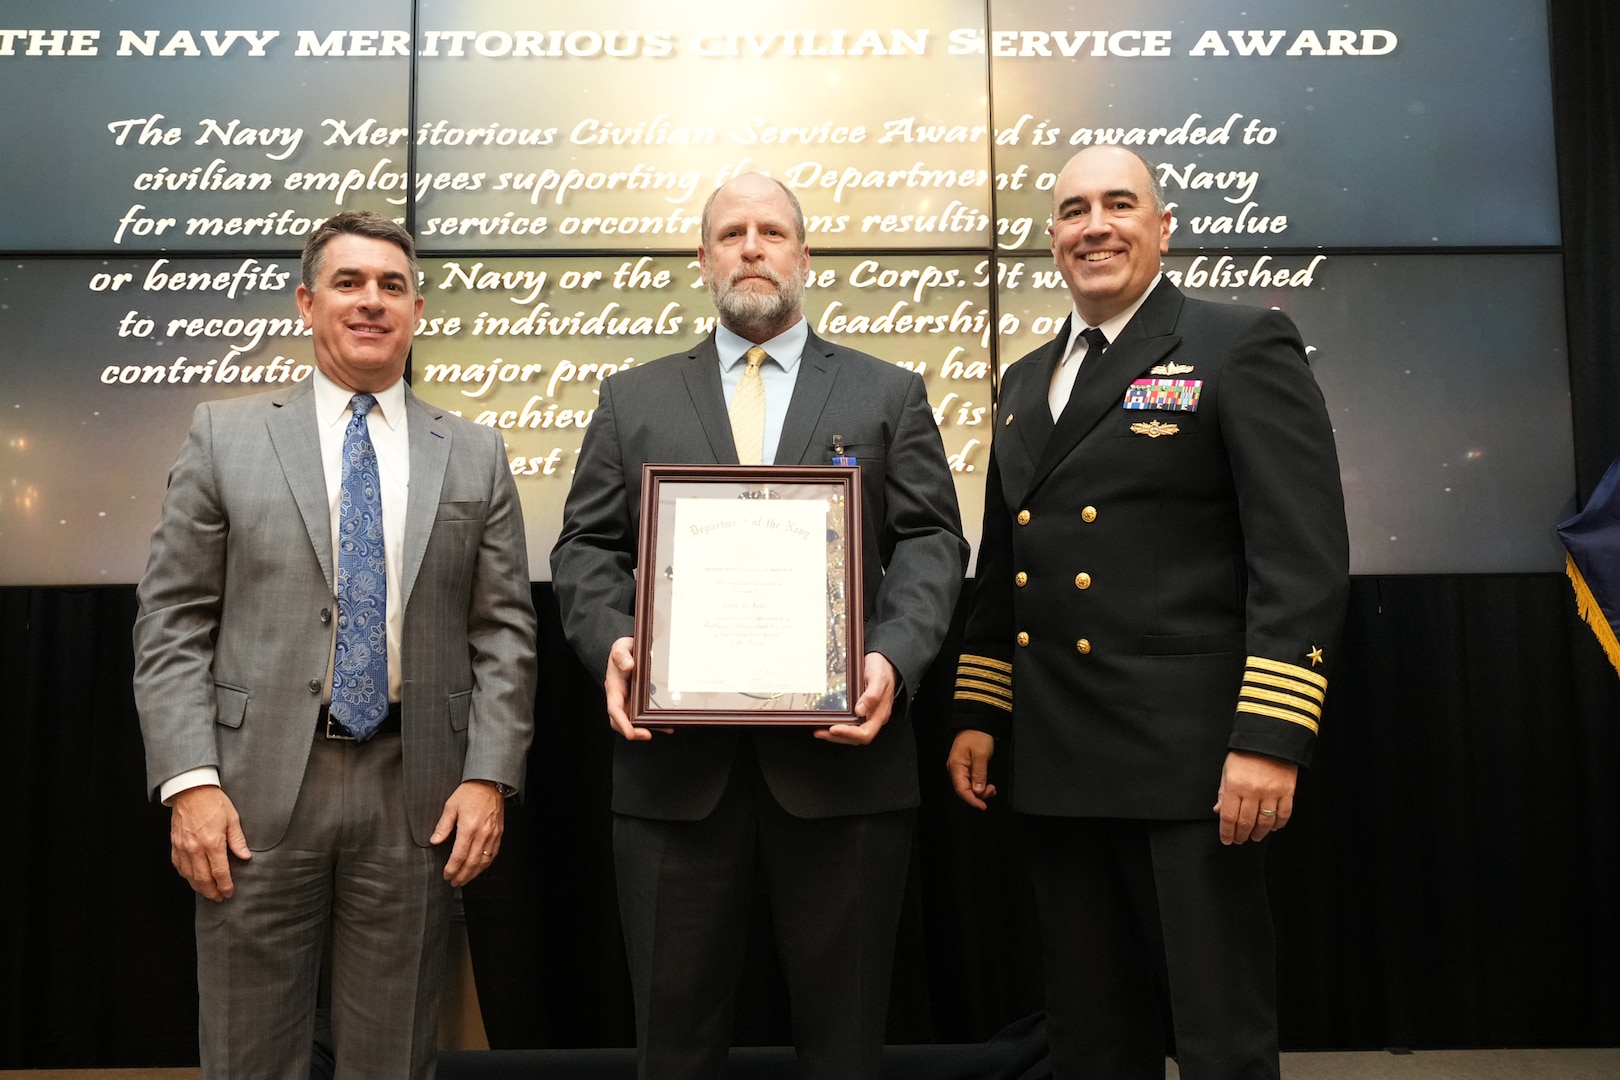 IMAGE: John Jims receives the Navy Meritorious Civilian Service Award at the 2021 Naval Surface Warfare Center Dahlgren Division (NSWCDD) Honorary Awards ceremony, June 17. Standing left to right: NSWCDD Technical Director, Dale Sisson, SES, Jims and NSWCDD Commanding Officer, Capt. Philip Mlynarski.